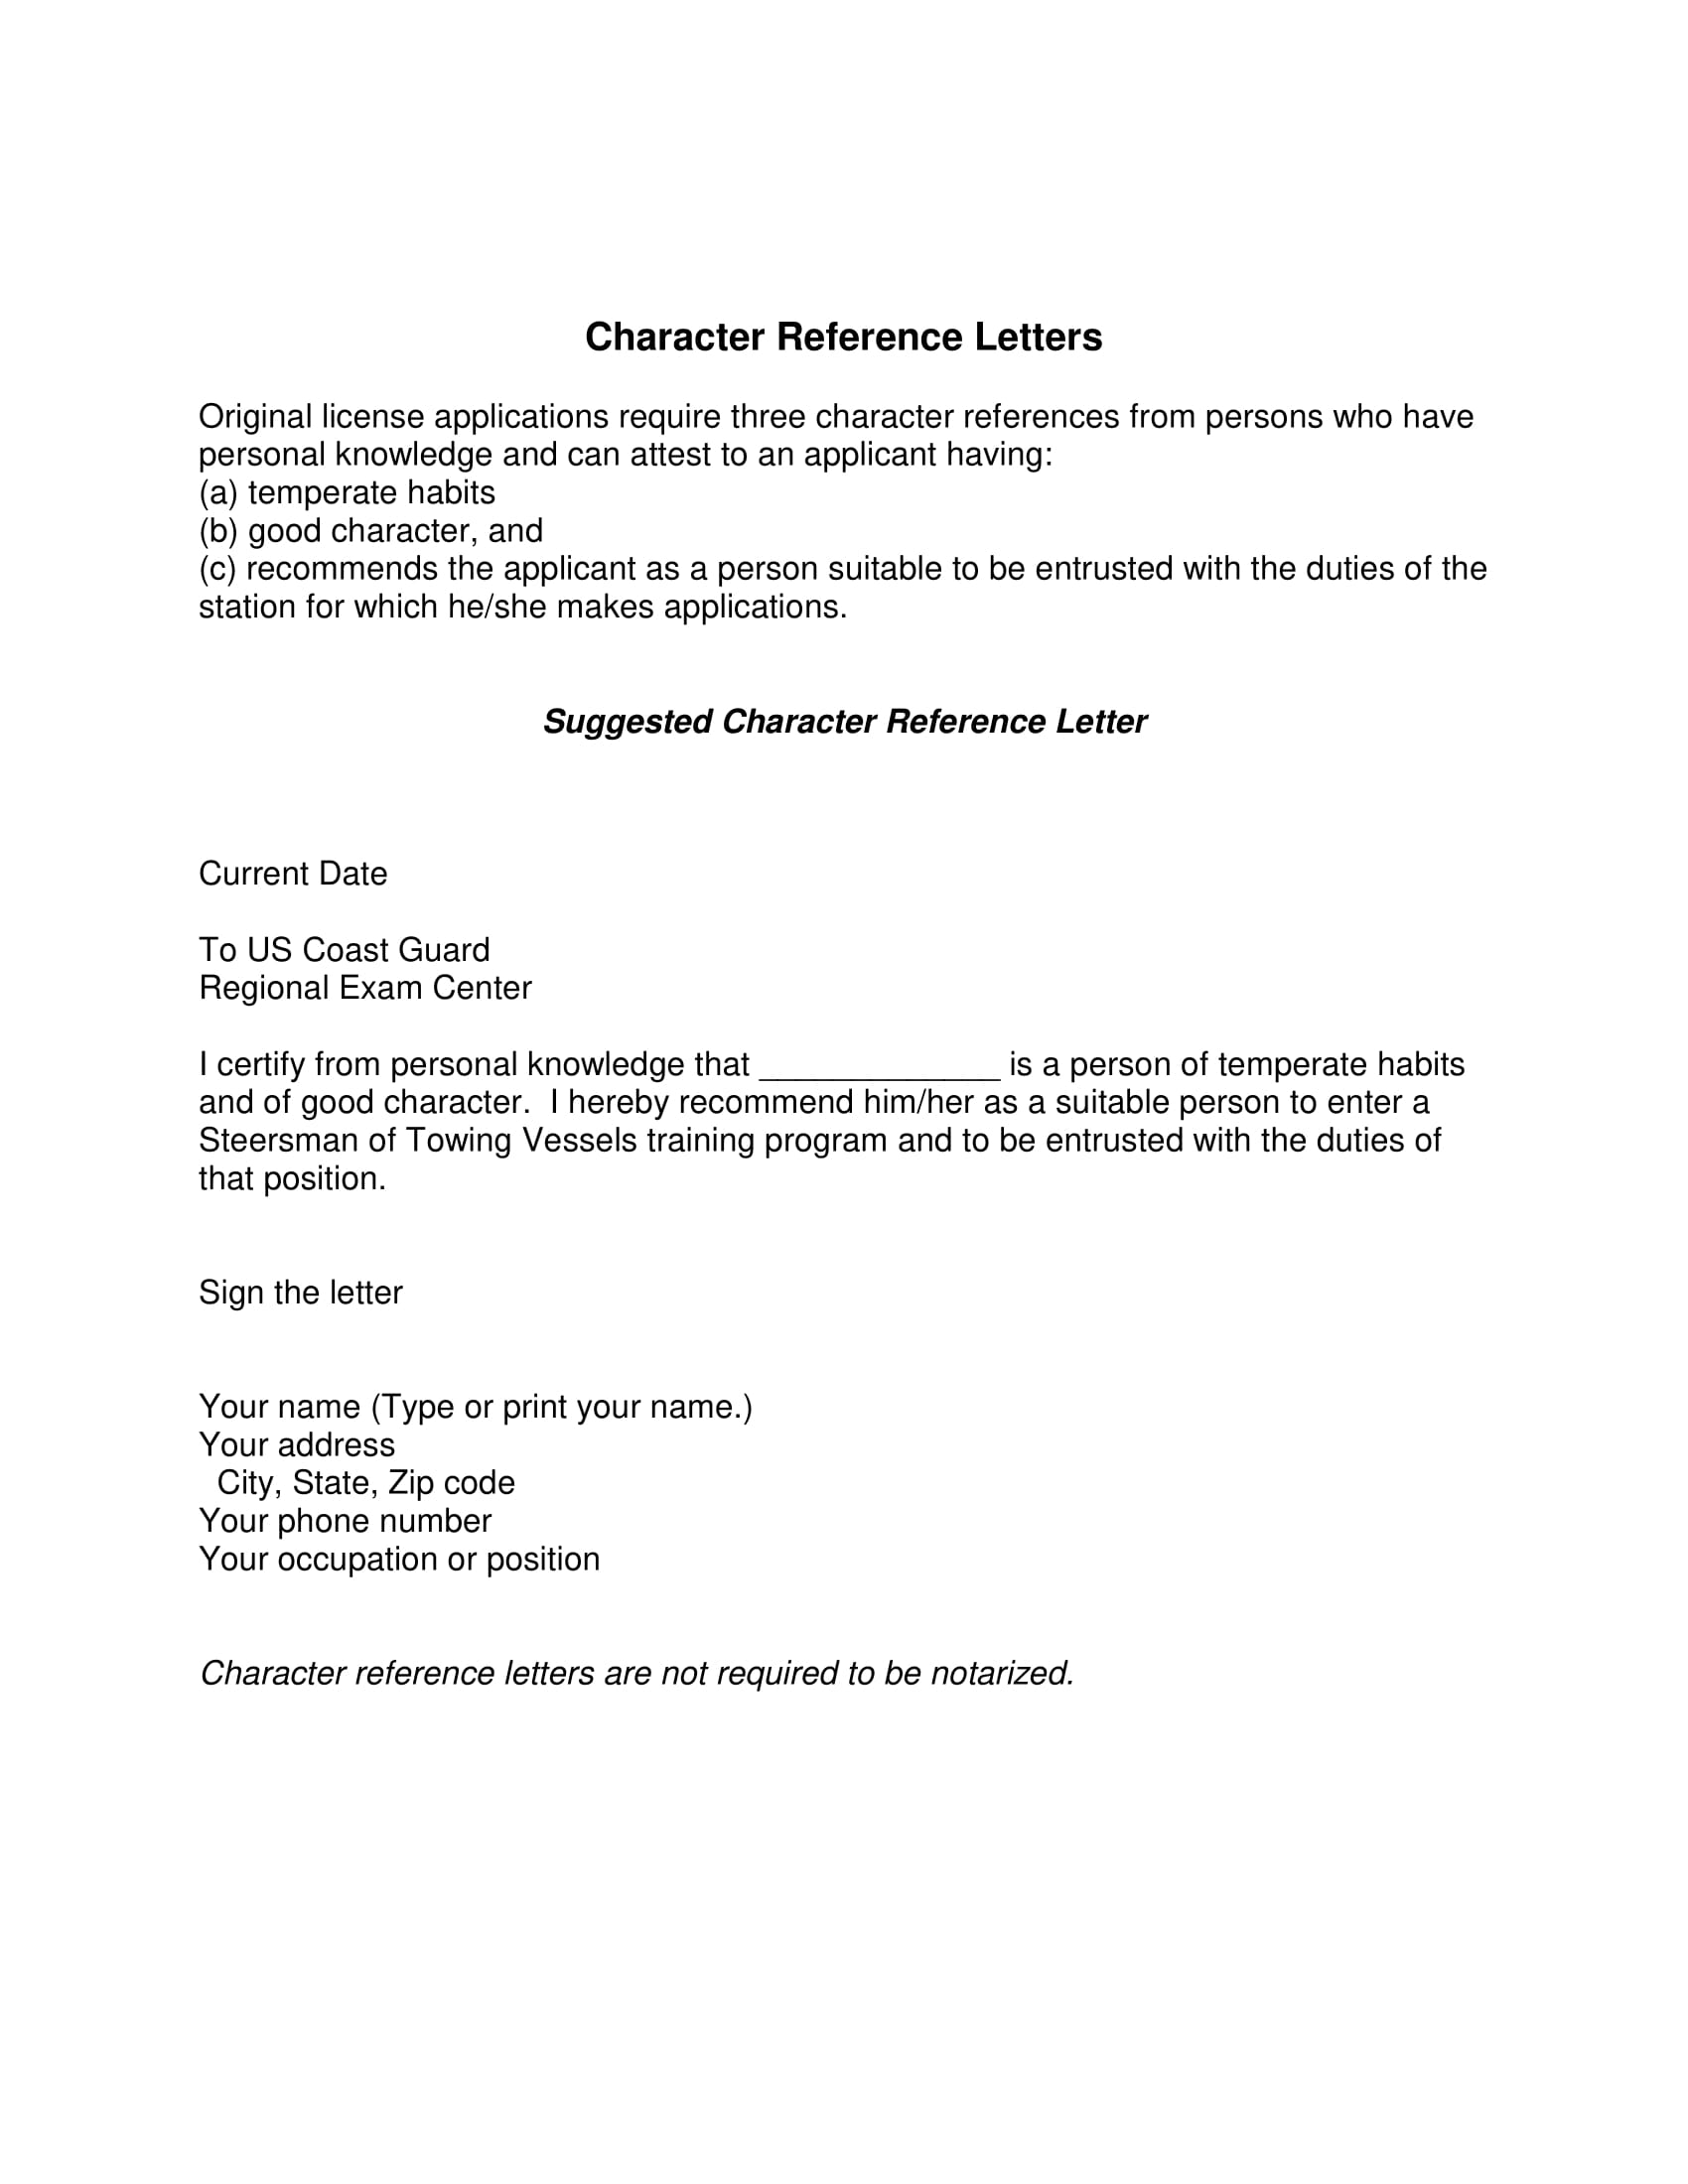 suggested character reference letter example 1